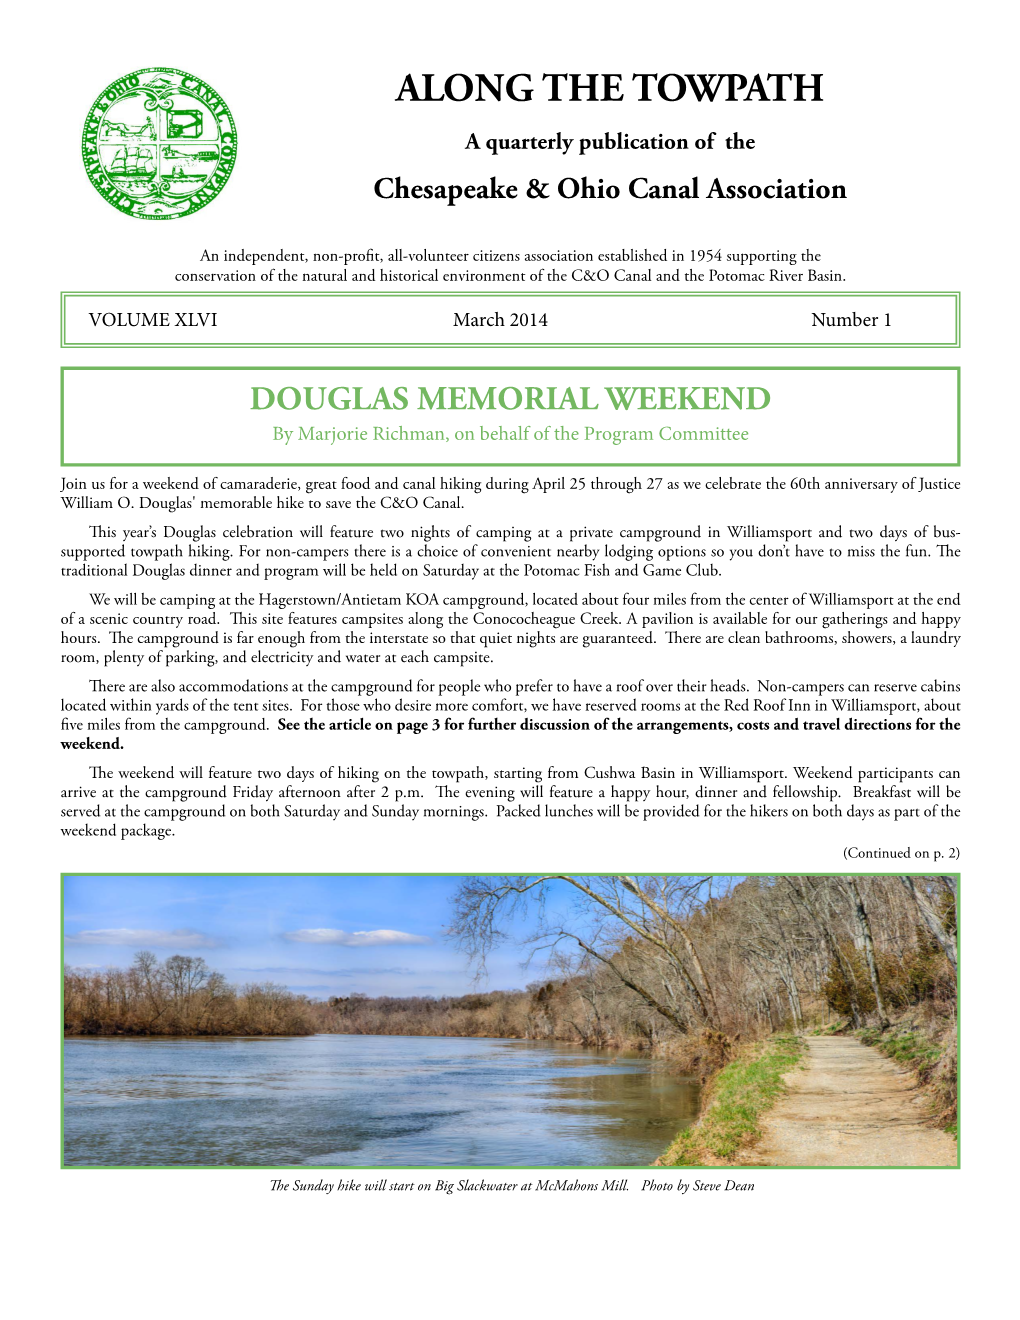 ALONG the TOWPATH a Quarterly Publication of the Chesapeake & Ohio Canal Association